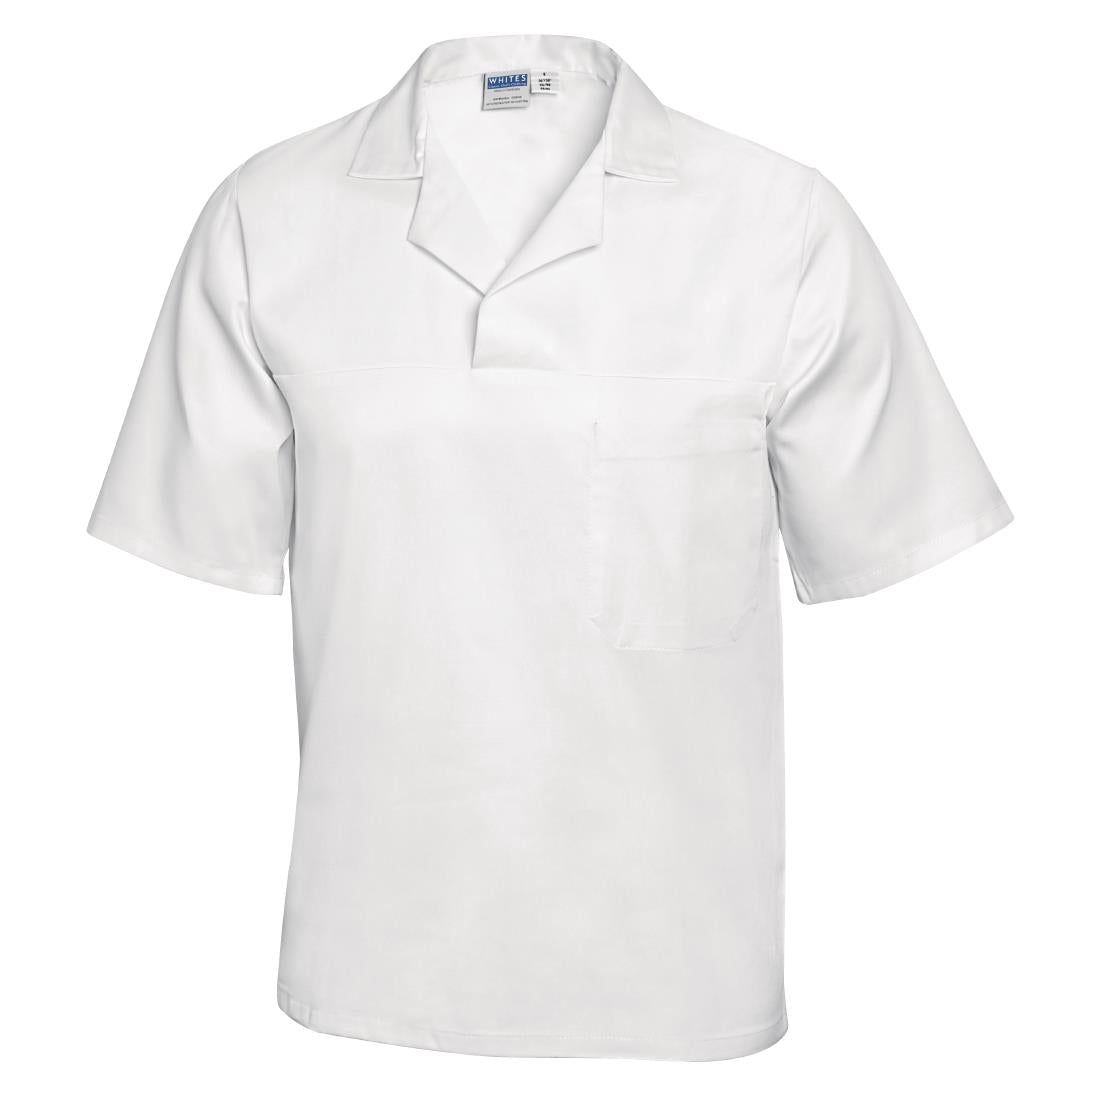 A102-M Unisex Bakers Shirt White M JD Catering Equipment Solutions Ltd